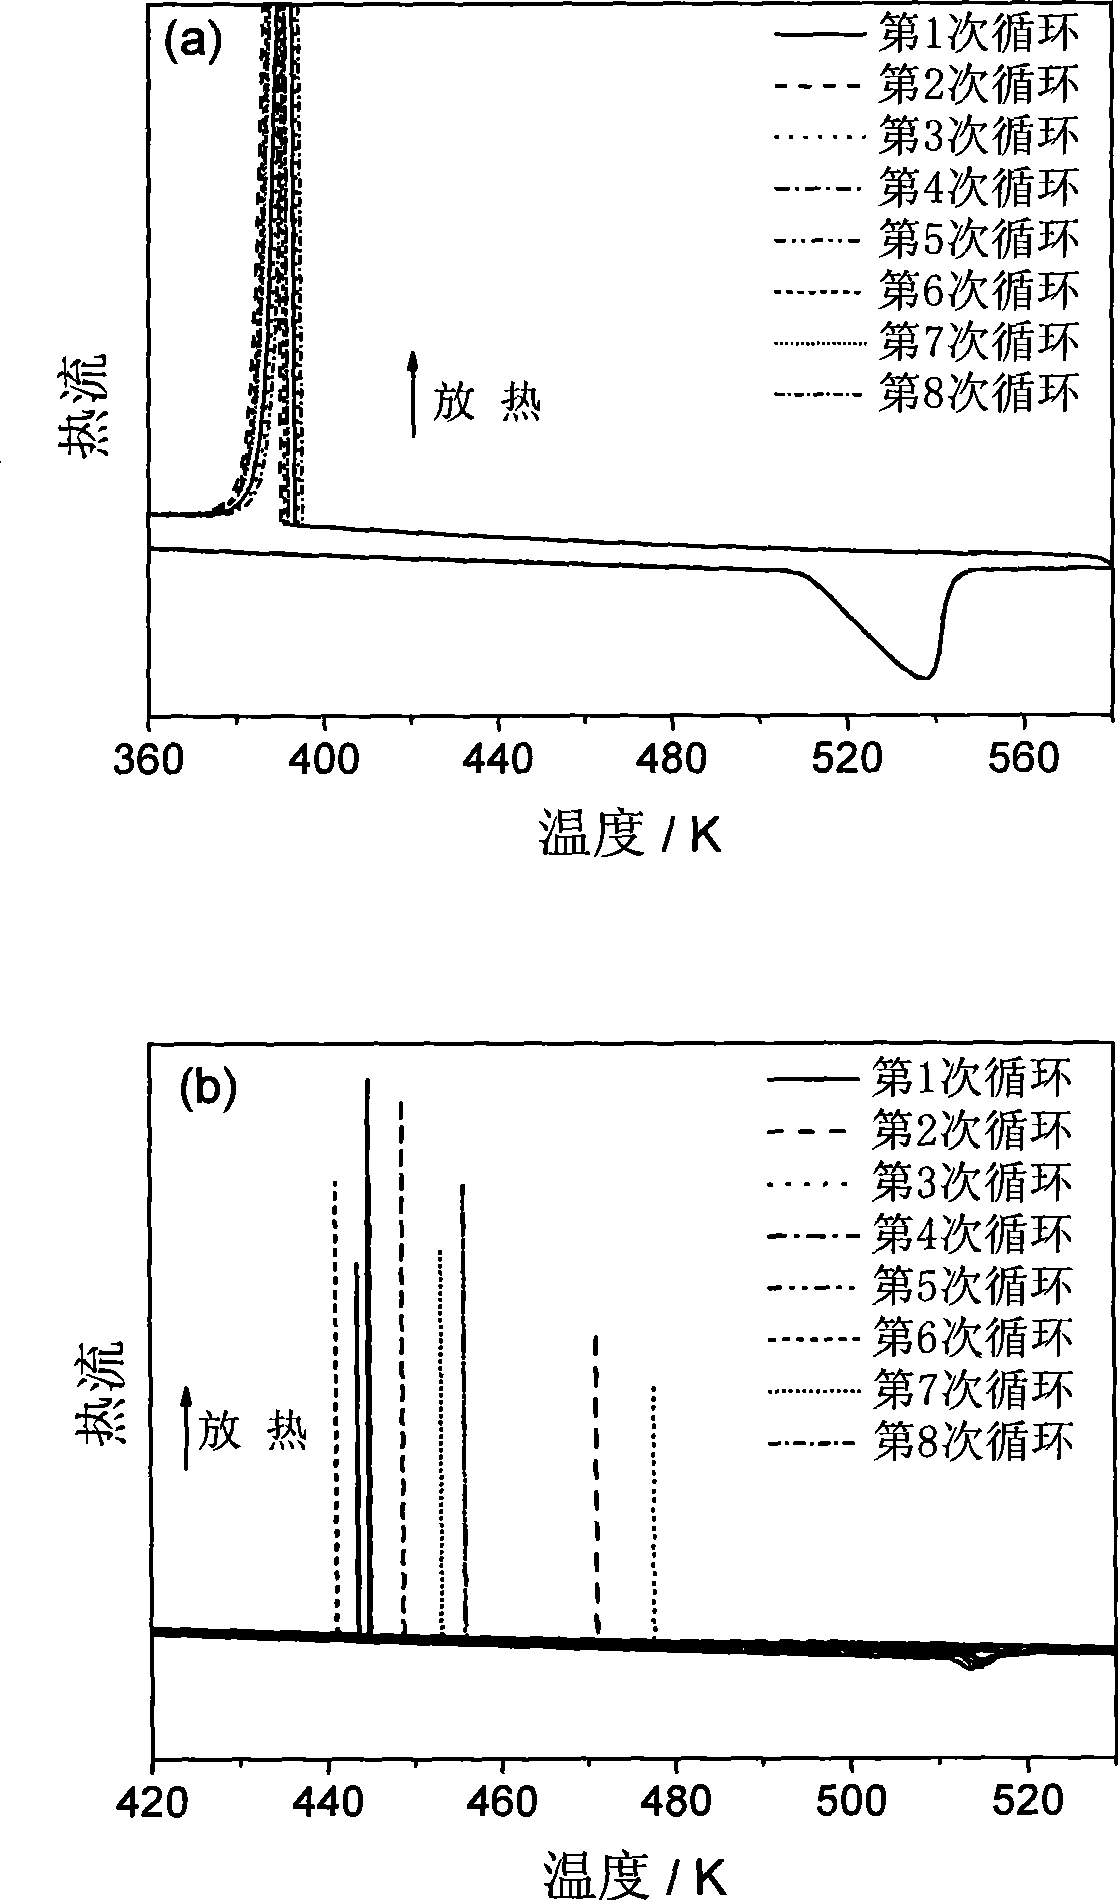 Method for single metal droplet supercooling degree measurement by large cooling speed in situ fast thermal analysis